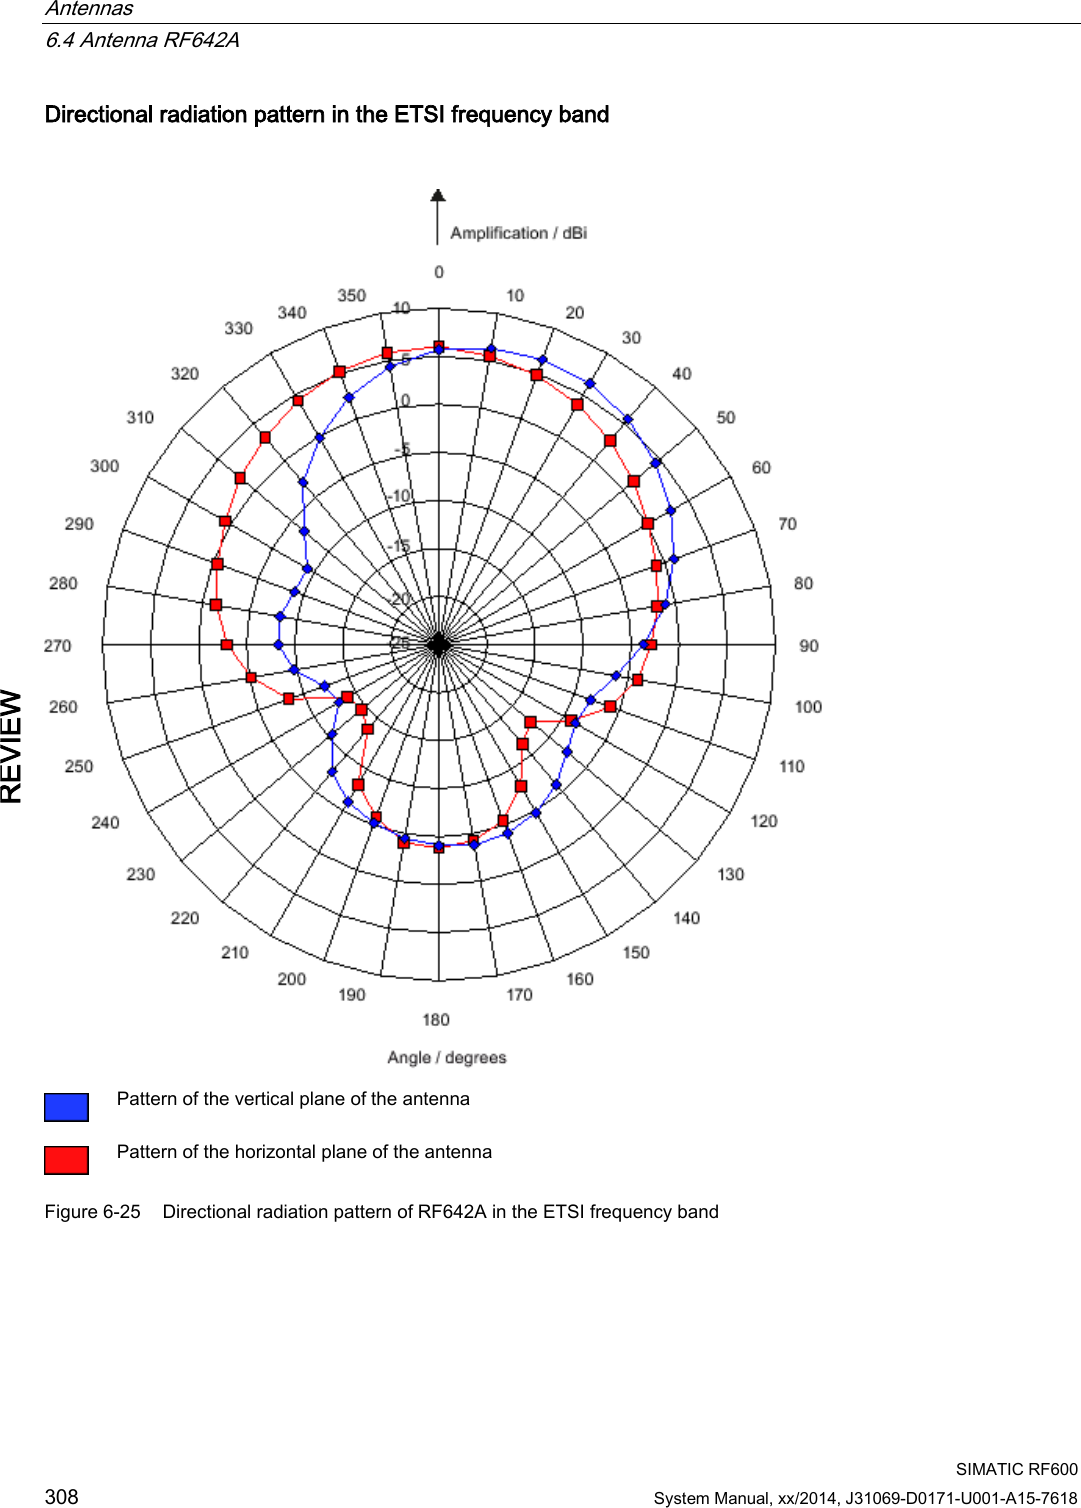 Antennas   6.4 Antenna RF642A  SIMATIC RF600 308 System Manual, xx/2014, J31069-D0171-U001-A15-7618 REVIEW Directional radiation pattern in the ETSI frequency band    Pattern of the vertical plane of the antenna  Pattern of the horizontal plane of the antenna Figure 6-25 Directional radiation pattern of RF642A in the ETSI frequency band 